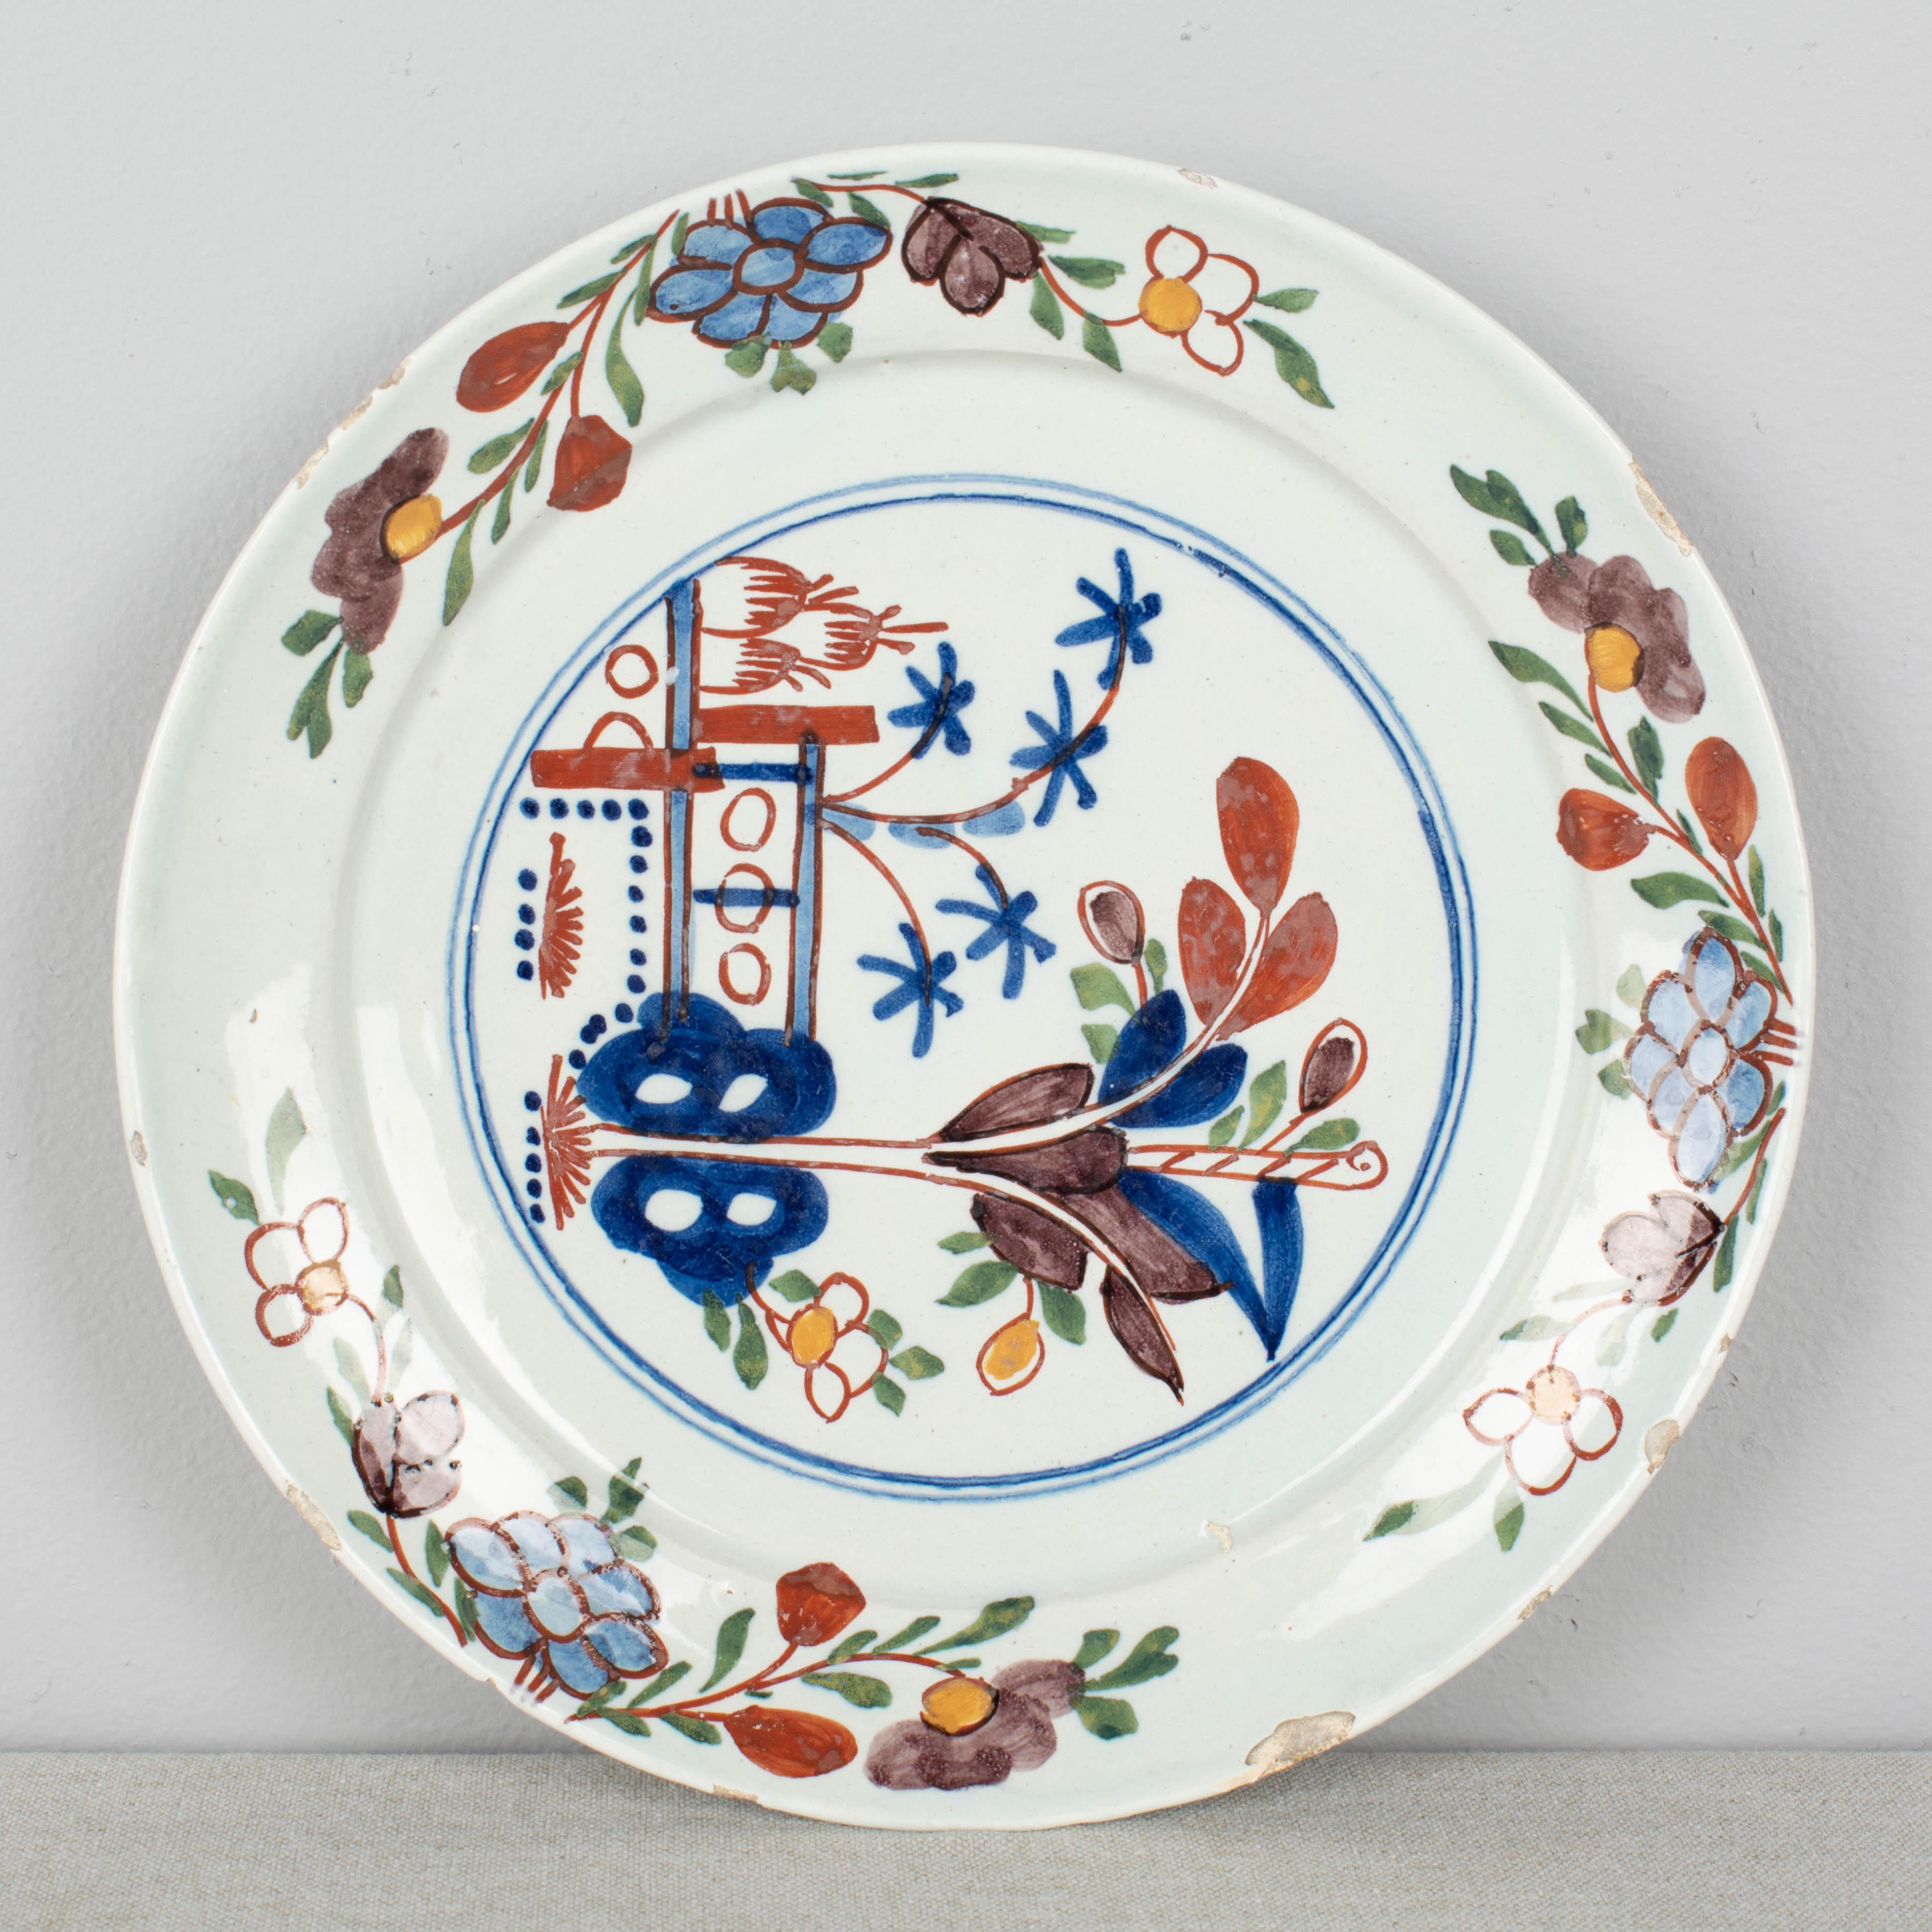 An 18th century Delft ceramic plate, hand-painted in, blue red and green with floral decoration. Several chips to rim.